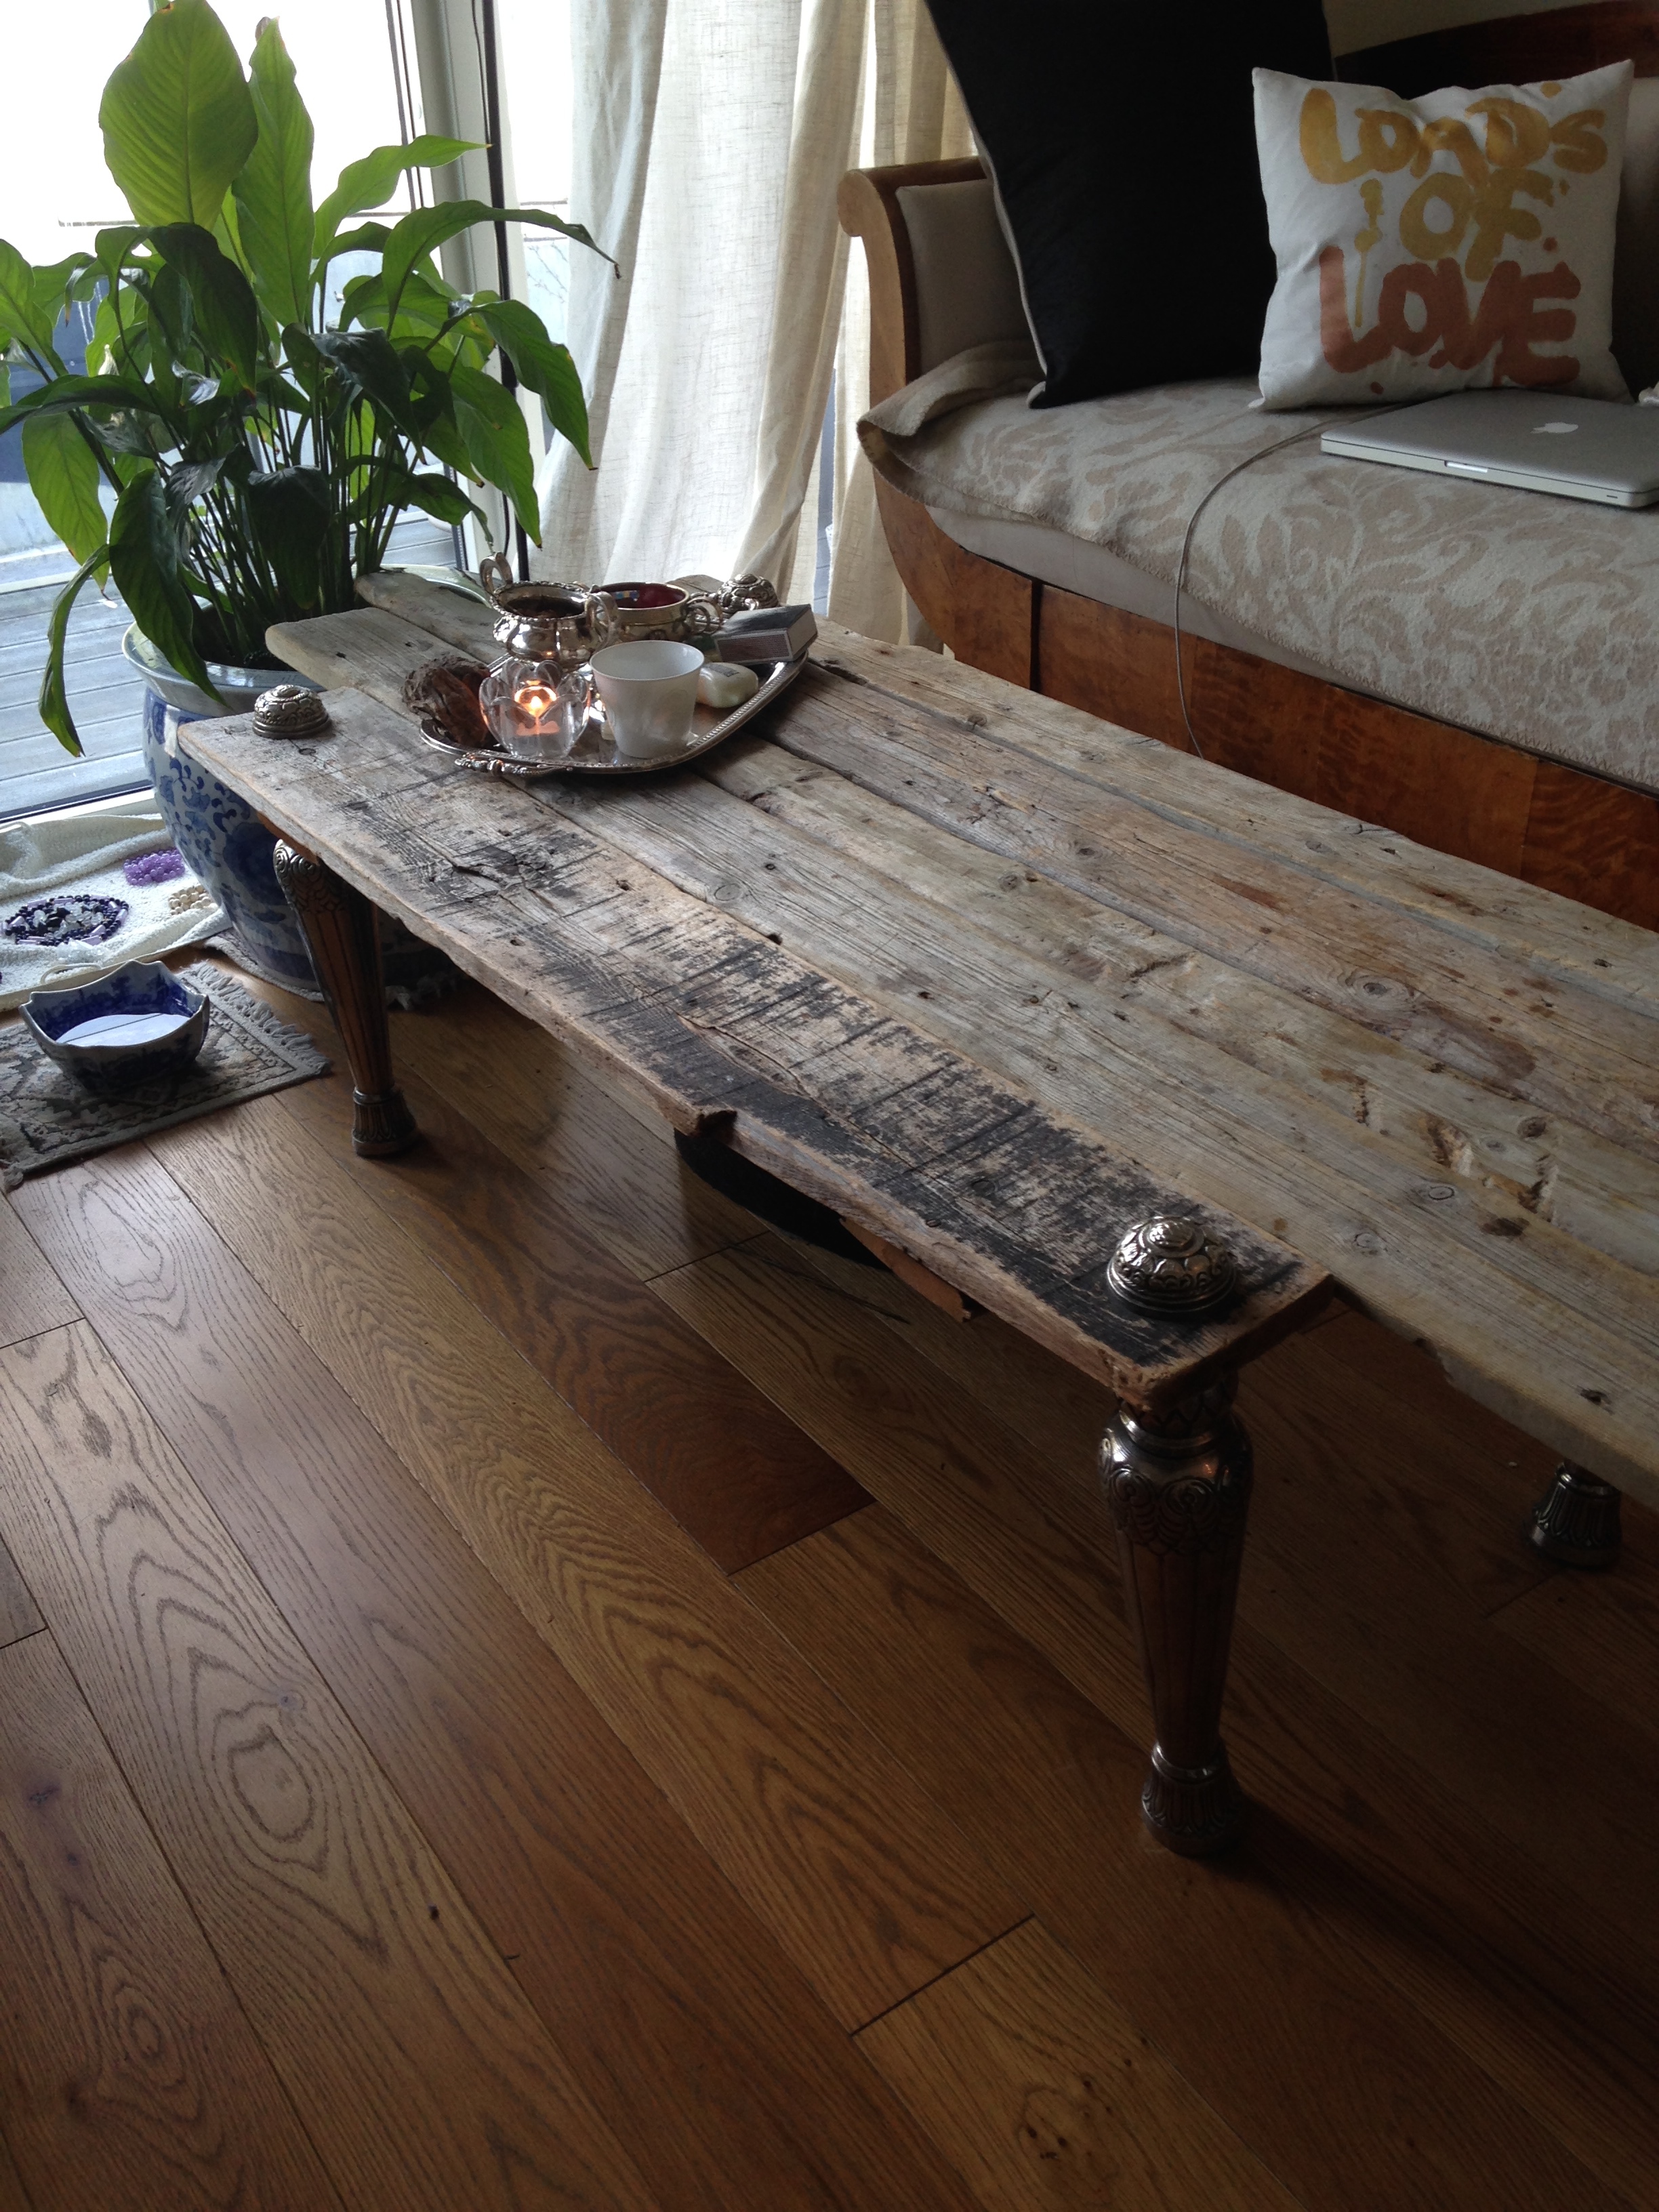 Driftwood coffee table design and craft, VLM